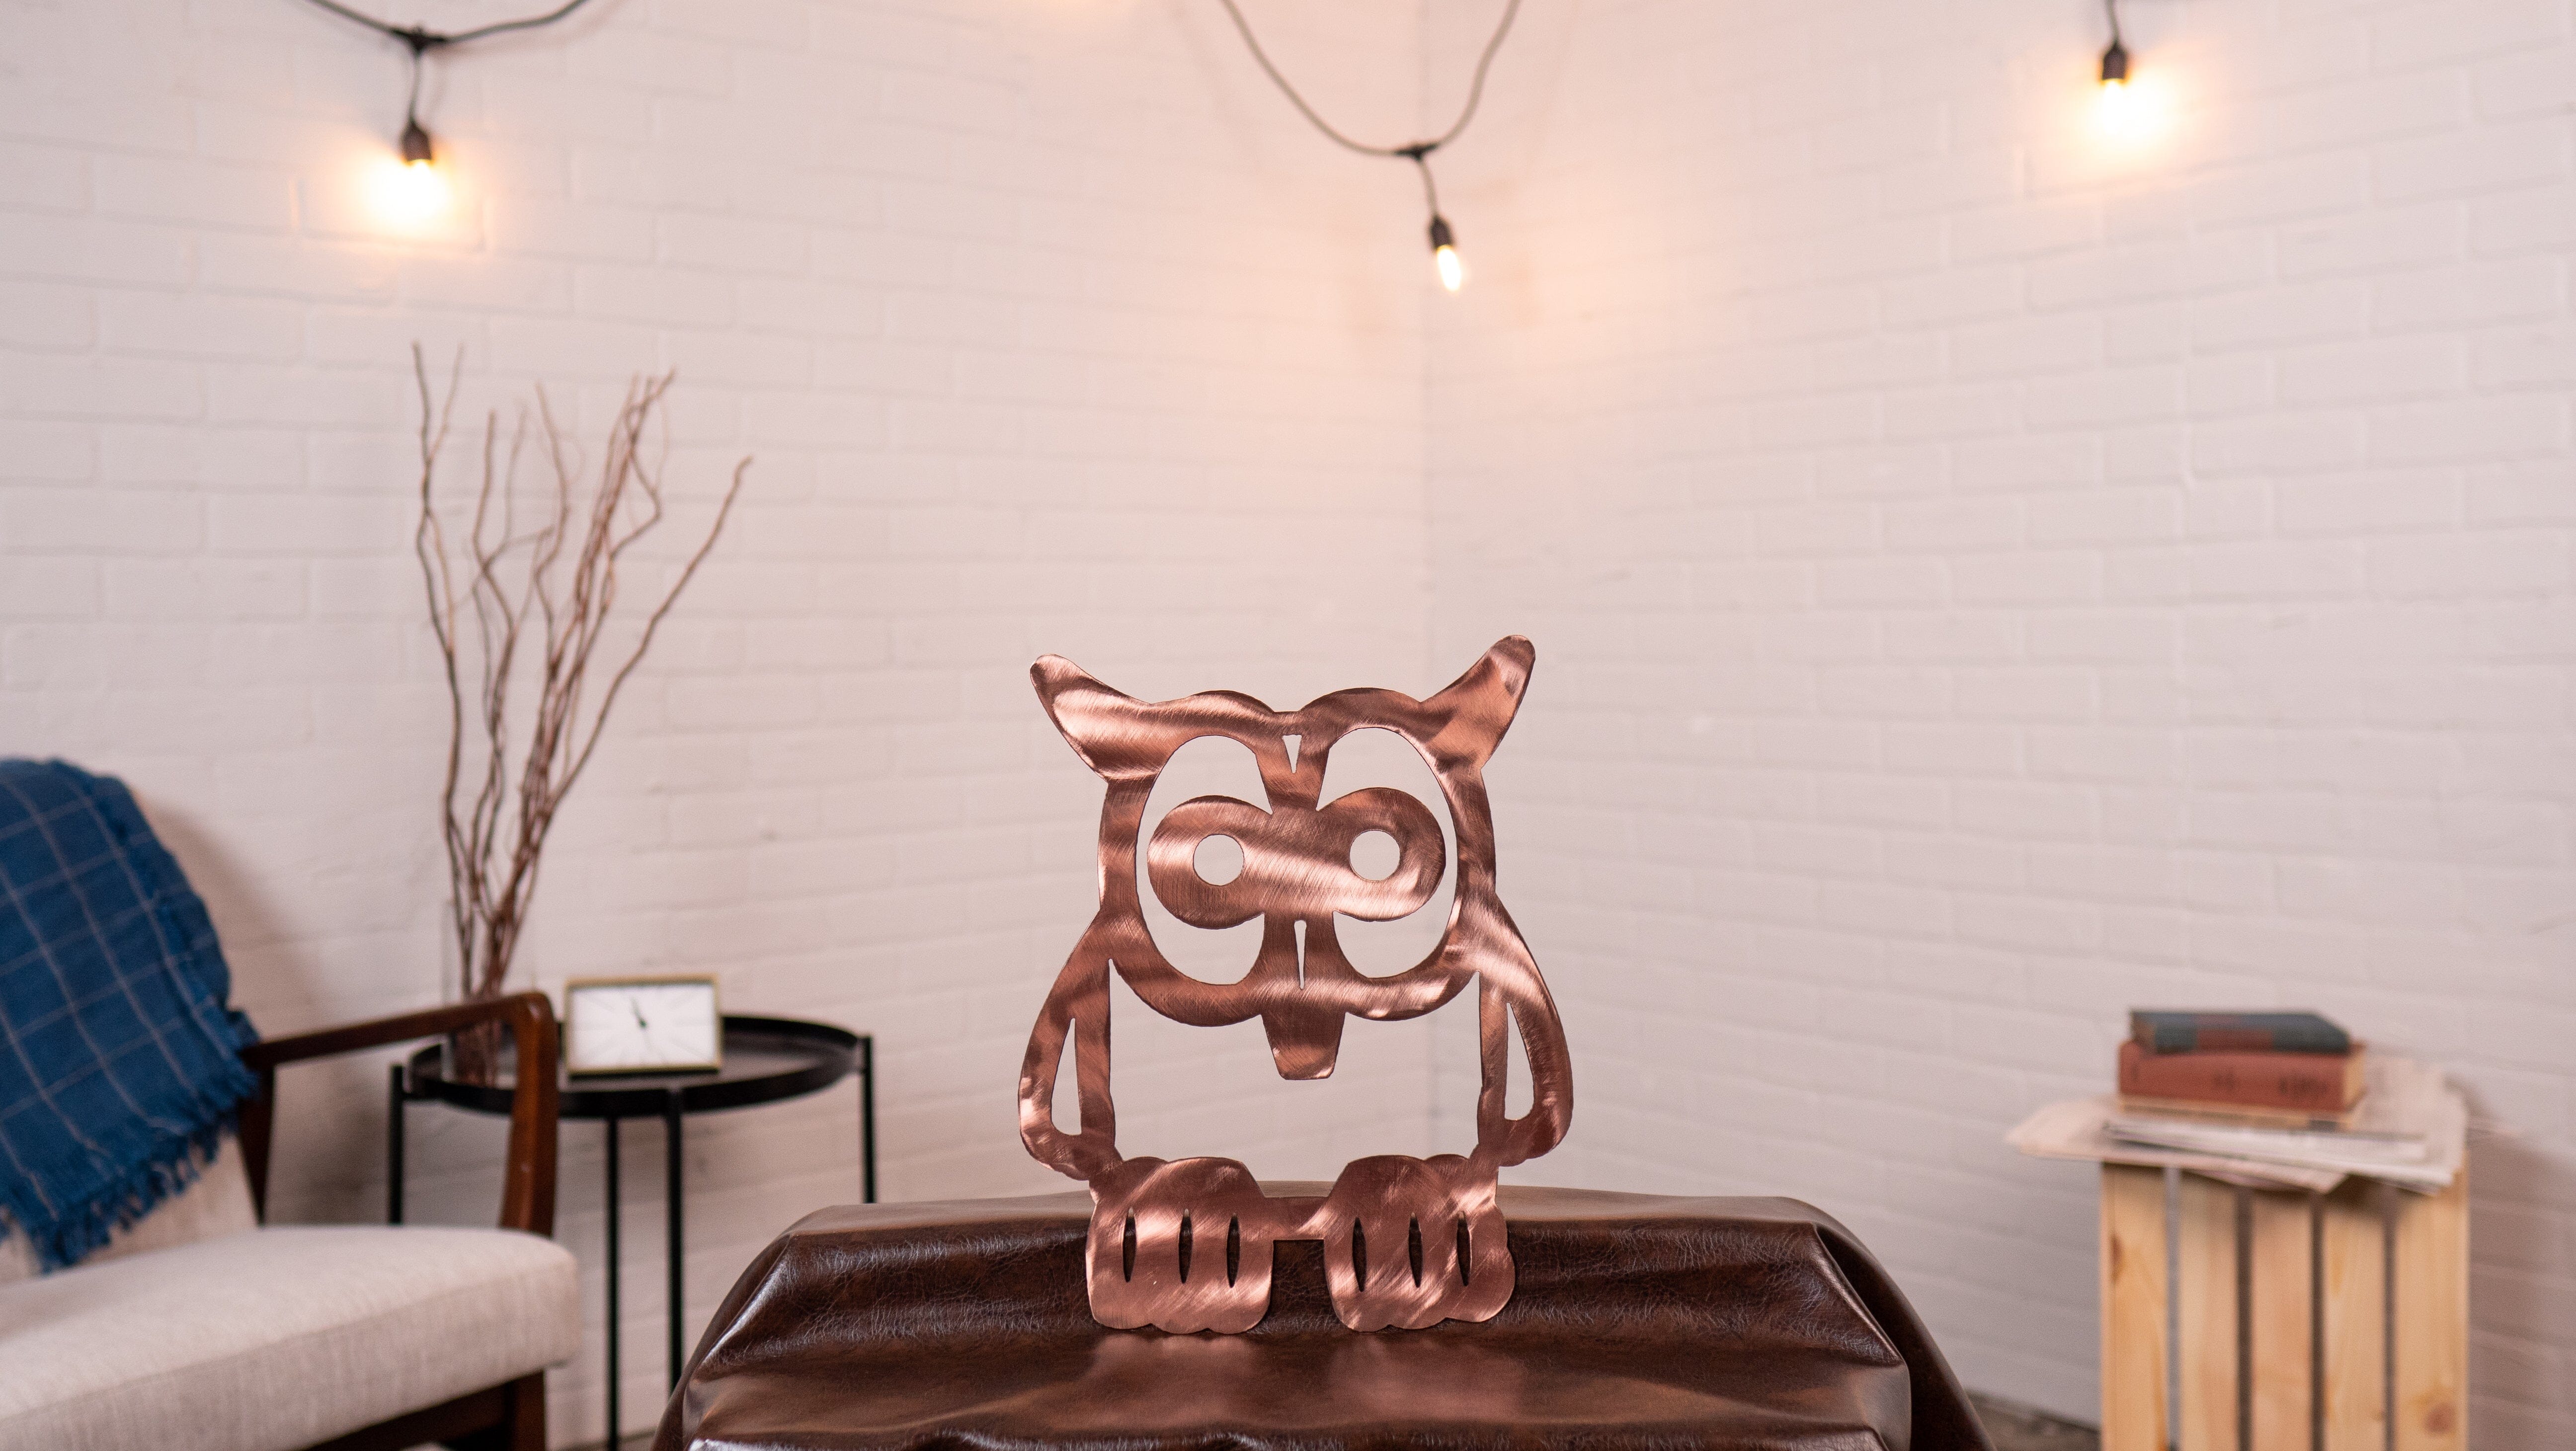 Angus the Owl Wall Art Third Shift Fabrication Classic Copper Angus the Owl (No Magnet Kit) $55.00 